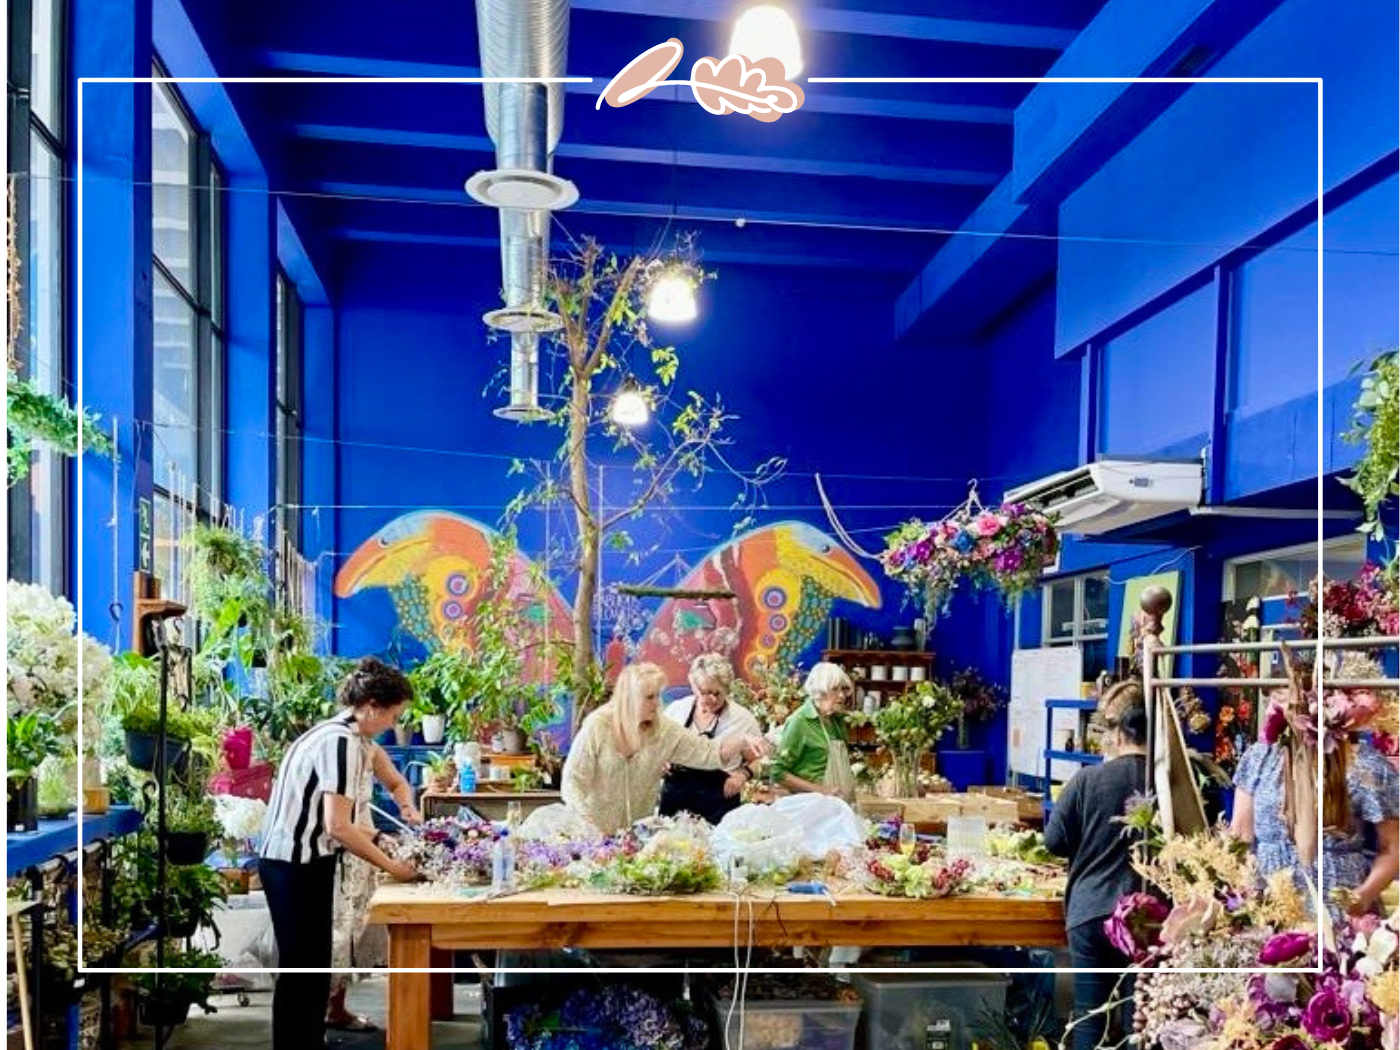 Interior of flower store in the Western Cape, bustling with florists creating beautiful arrangements for a function in the open public. Fabulous Flowers and Gifts.